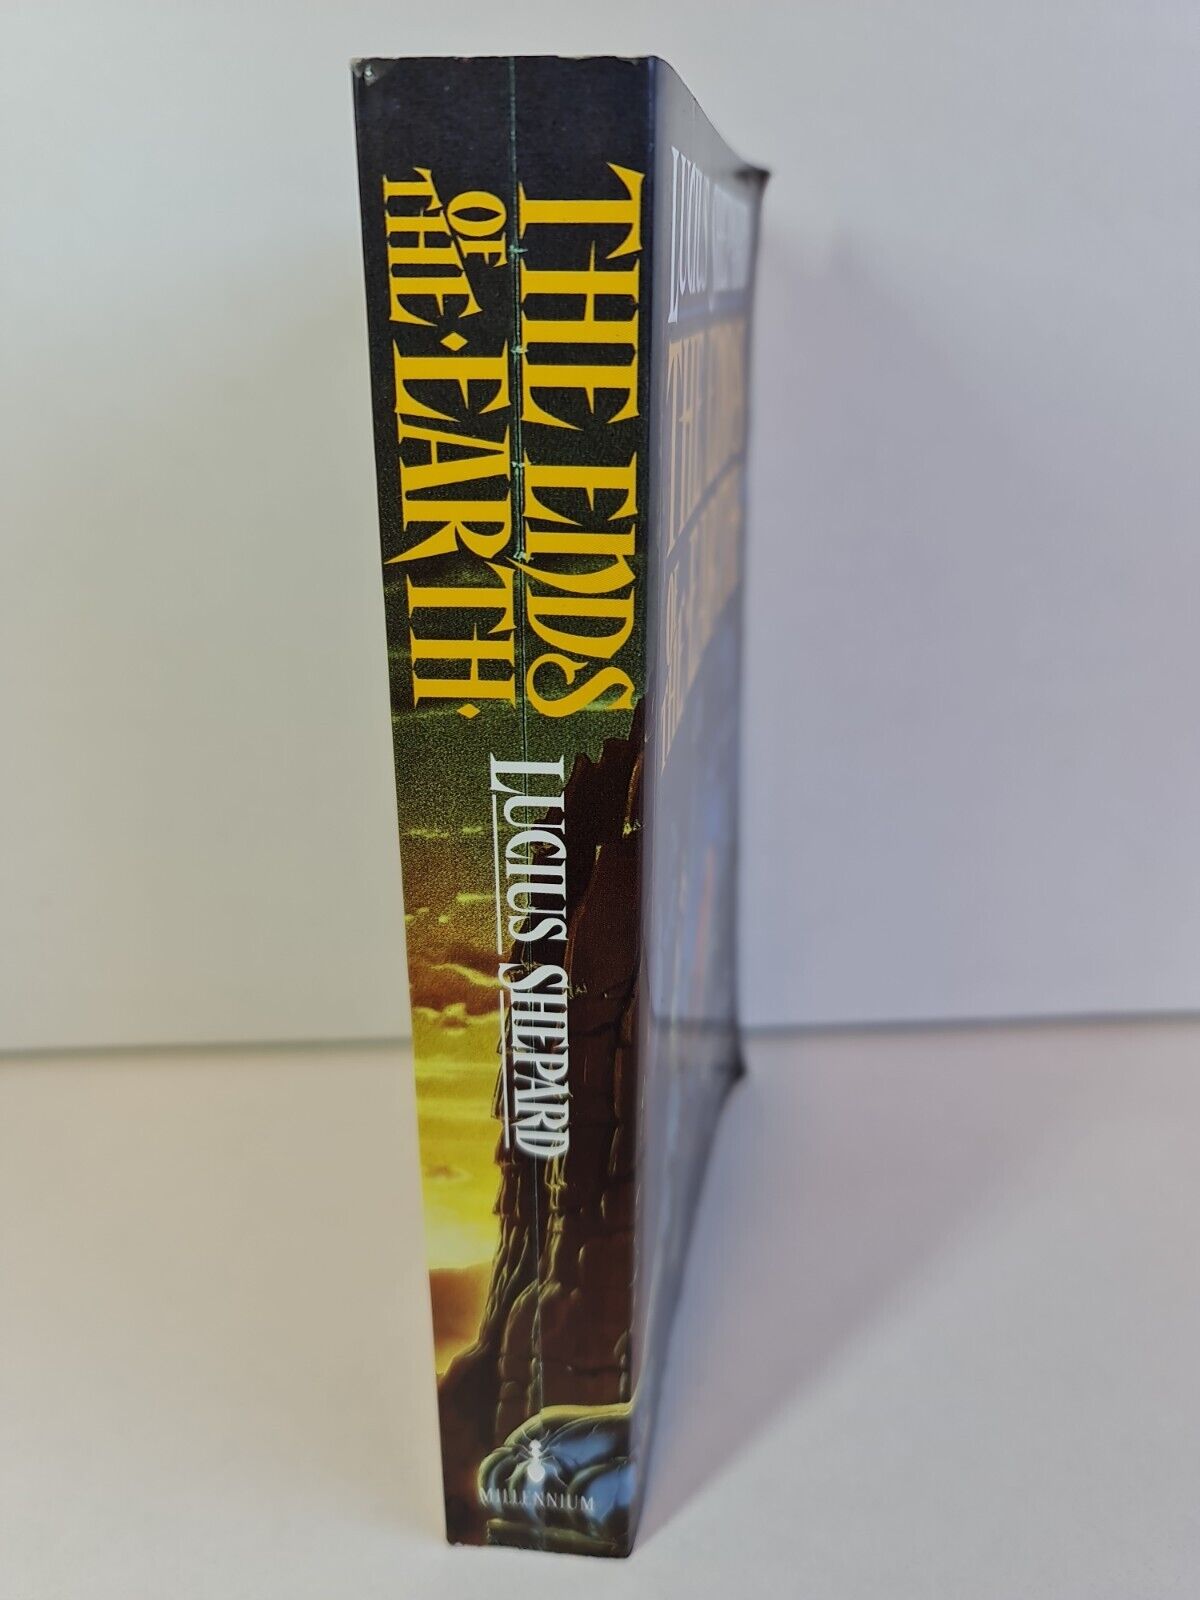 The Ends of the Earth by Lucius Shepherd (1994)